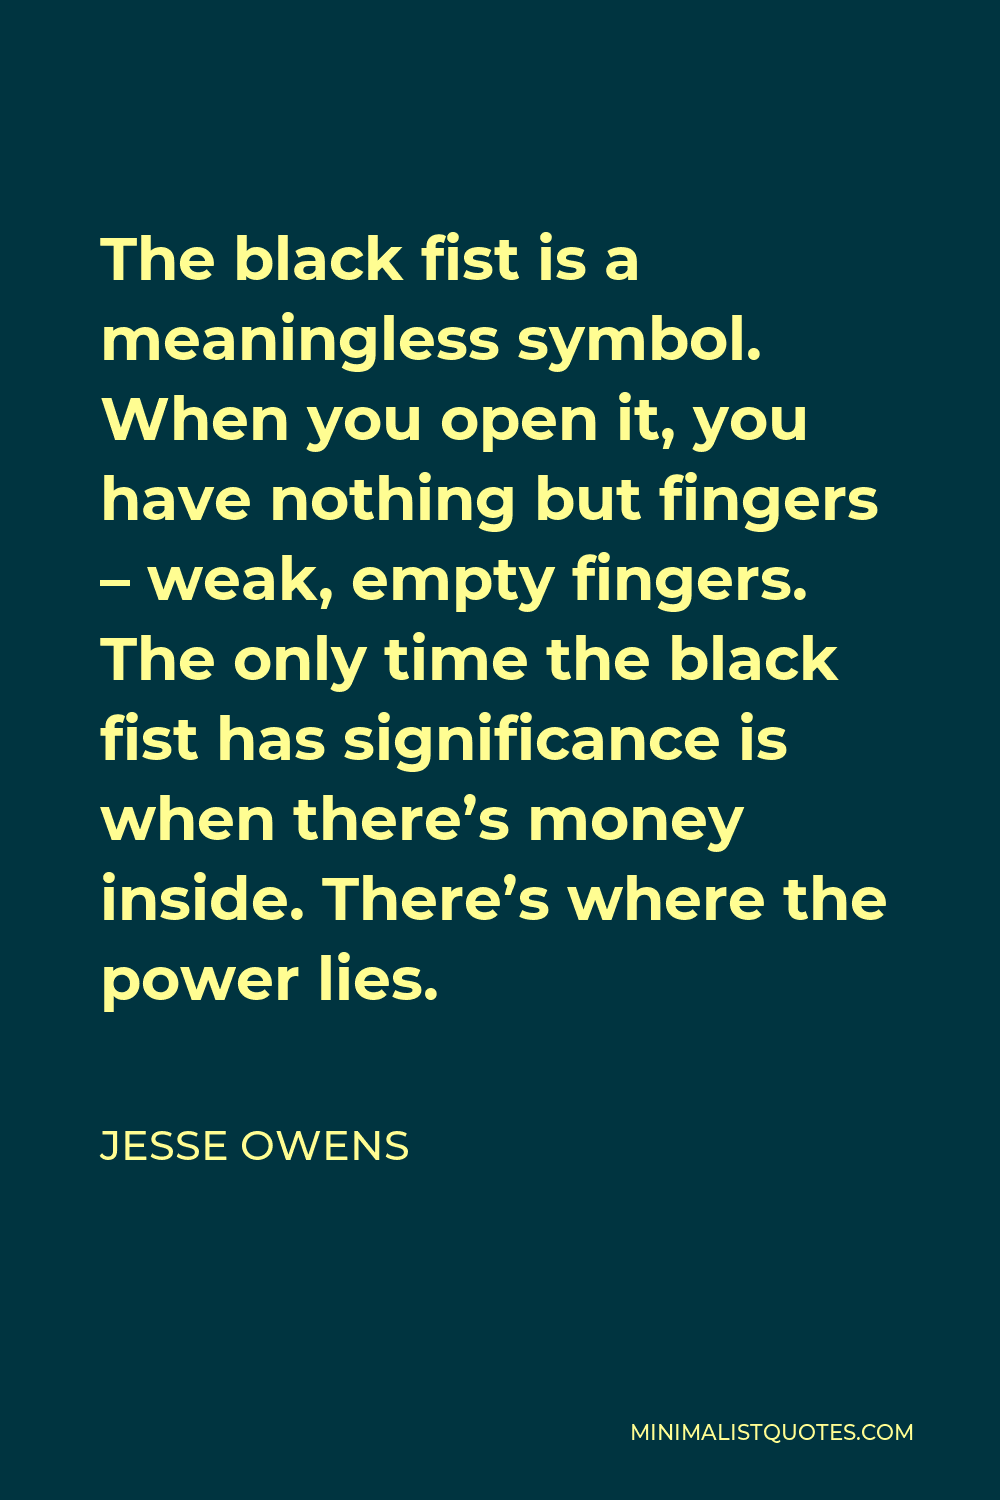 Jesse Owens Quote - The black fist is a meaningless symbol. When you open it, you have nothing but fingers – weak, empty fingers. The only time the black fist has significance is when there’s money inside. There’s where the power lies.